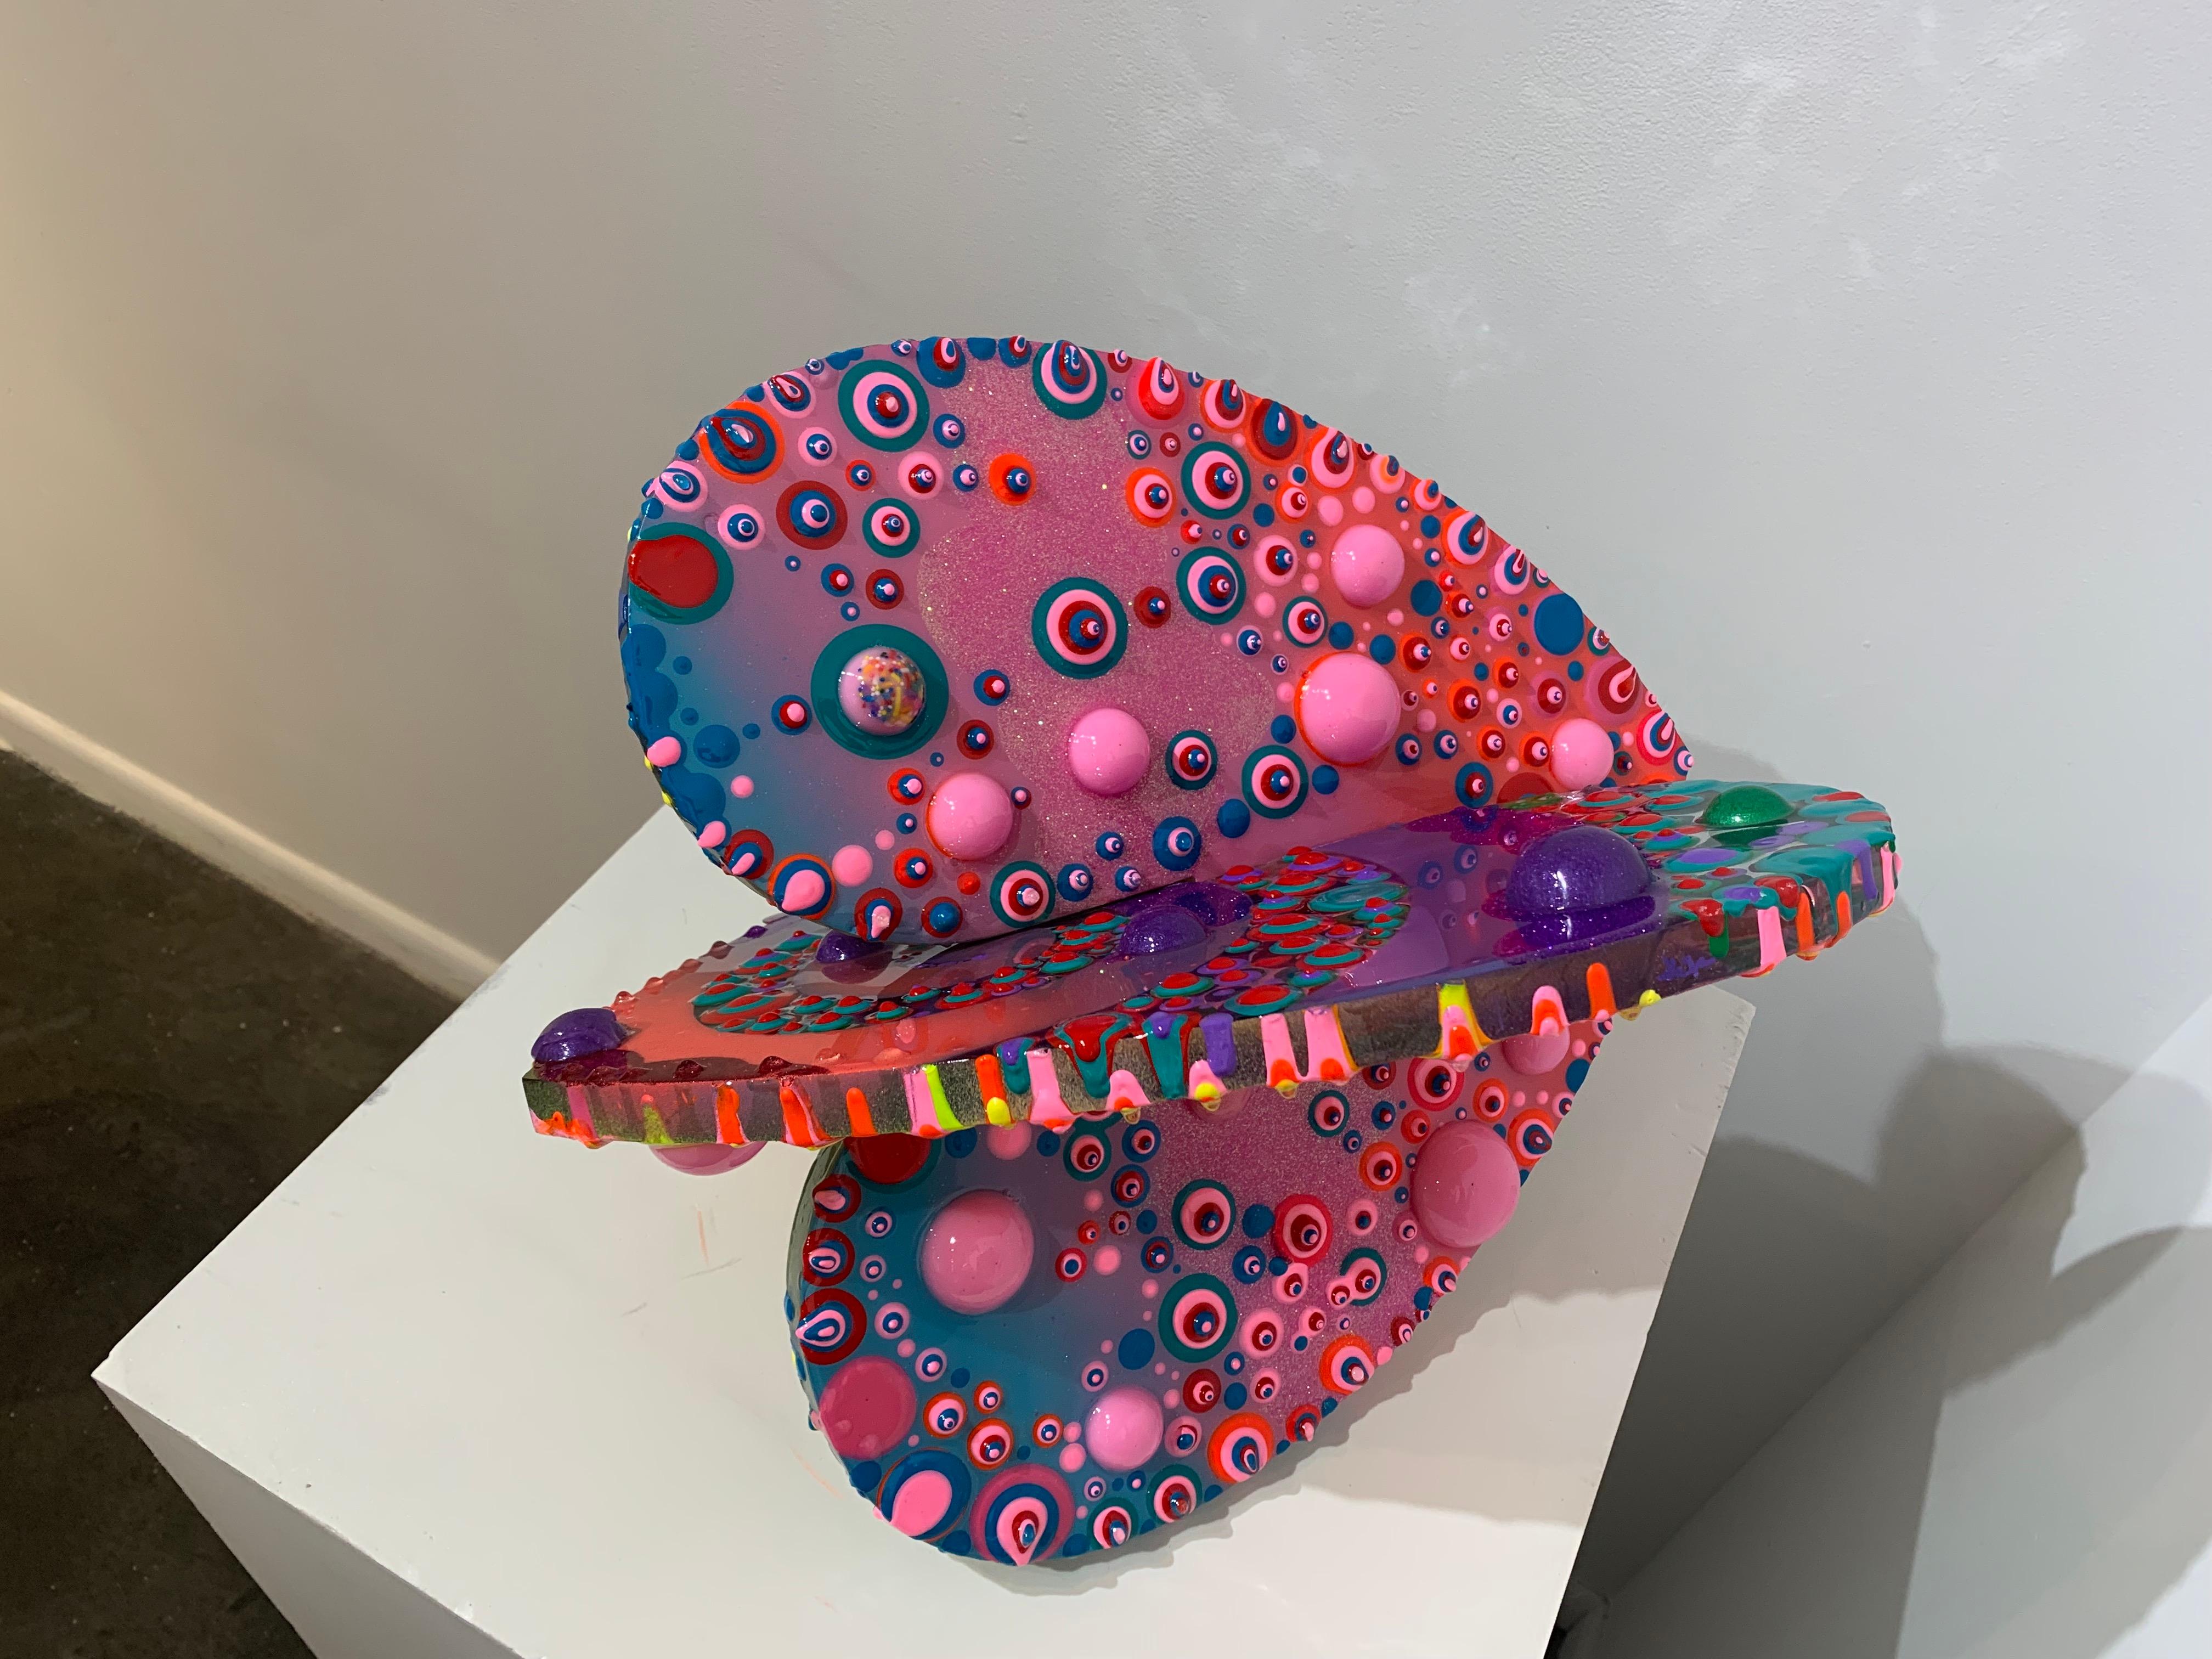 Michael Gitter, an American sculptor, has established a unique artistic identity through his masterful use of diverse materials, notably steel and acrylics, in crafting emotive and stylized artworks. His portfolio is a testament to his adeptness in